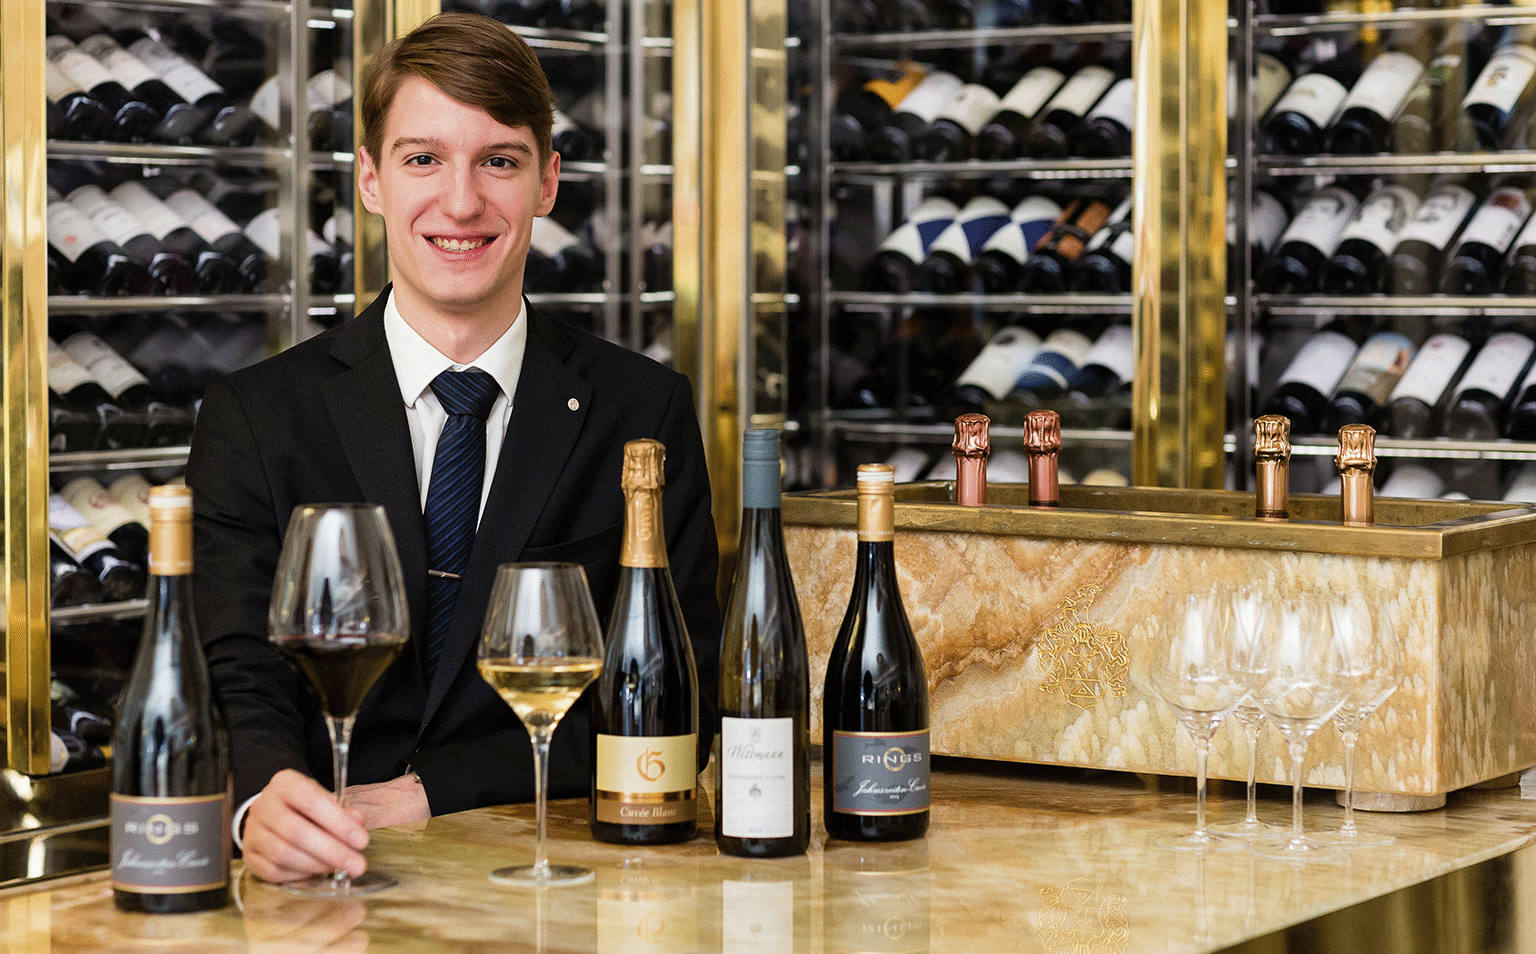 Young German Marc Almert is the Best Sommelier in the World 2019 by Asi - WineNews